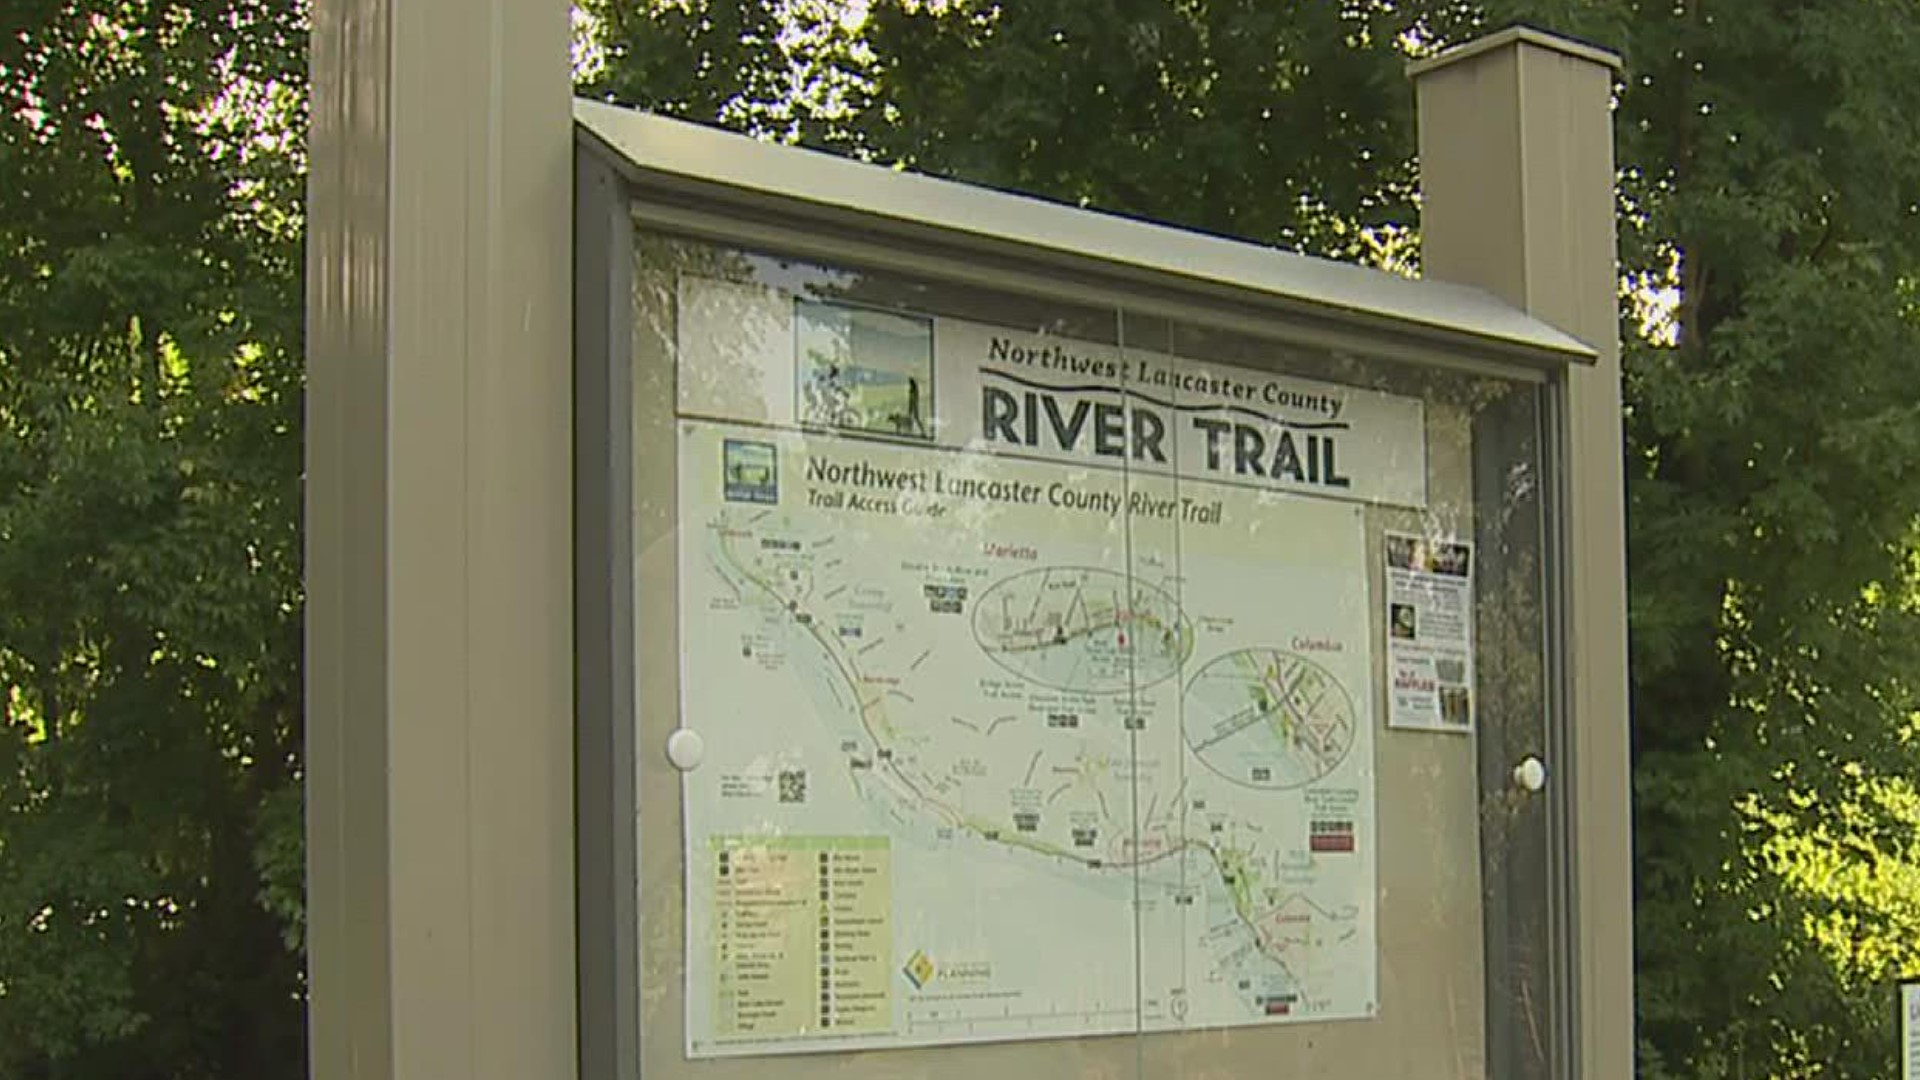 The finished trail links the Susquehanna River Water Trail, giving more locals access to recreational walking, biking and paddling opportunities.